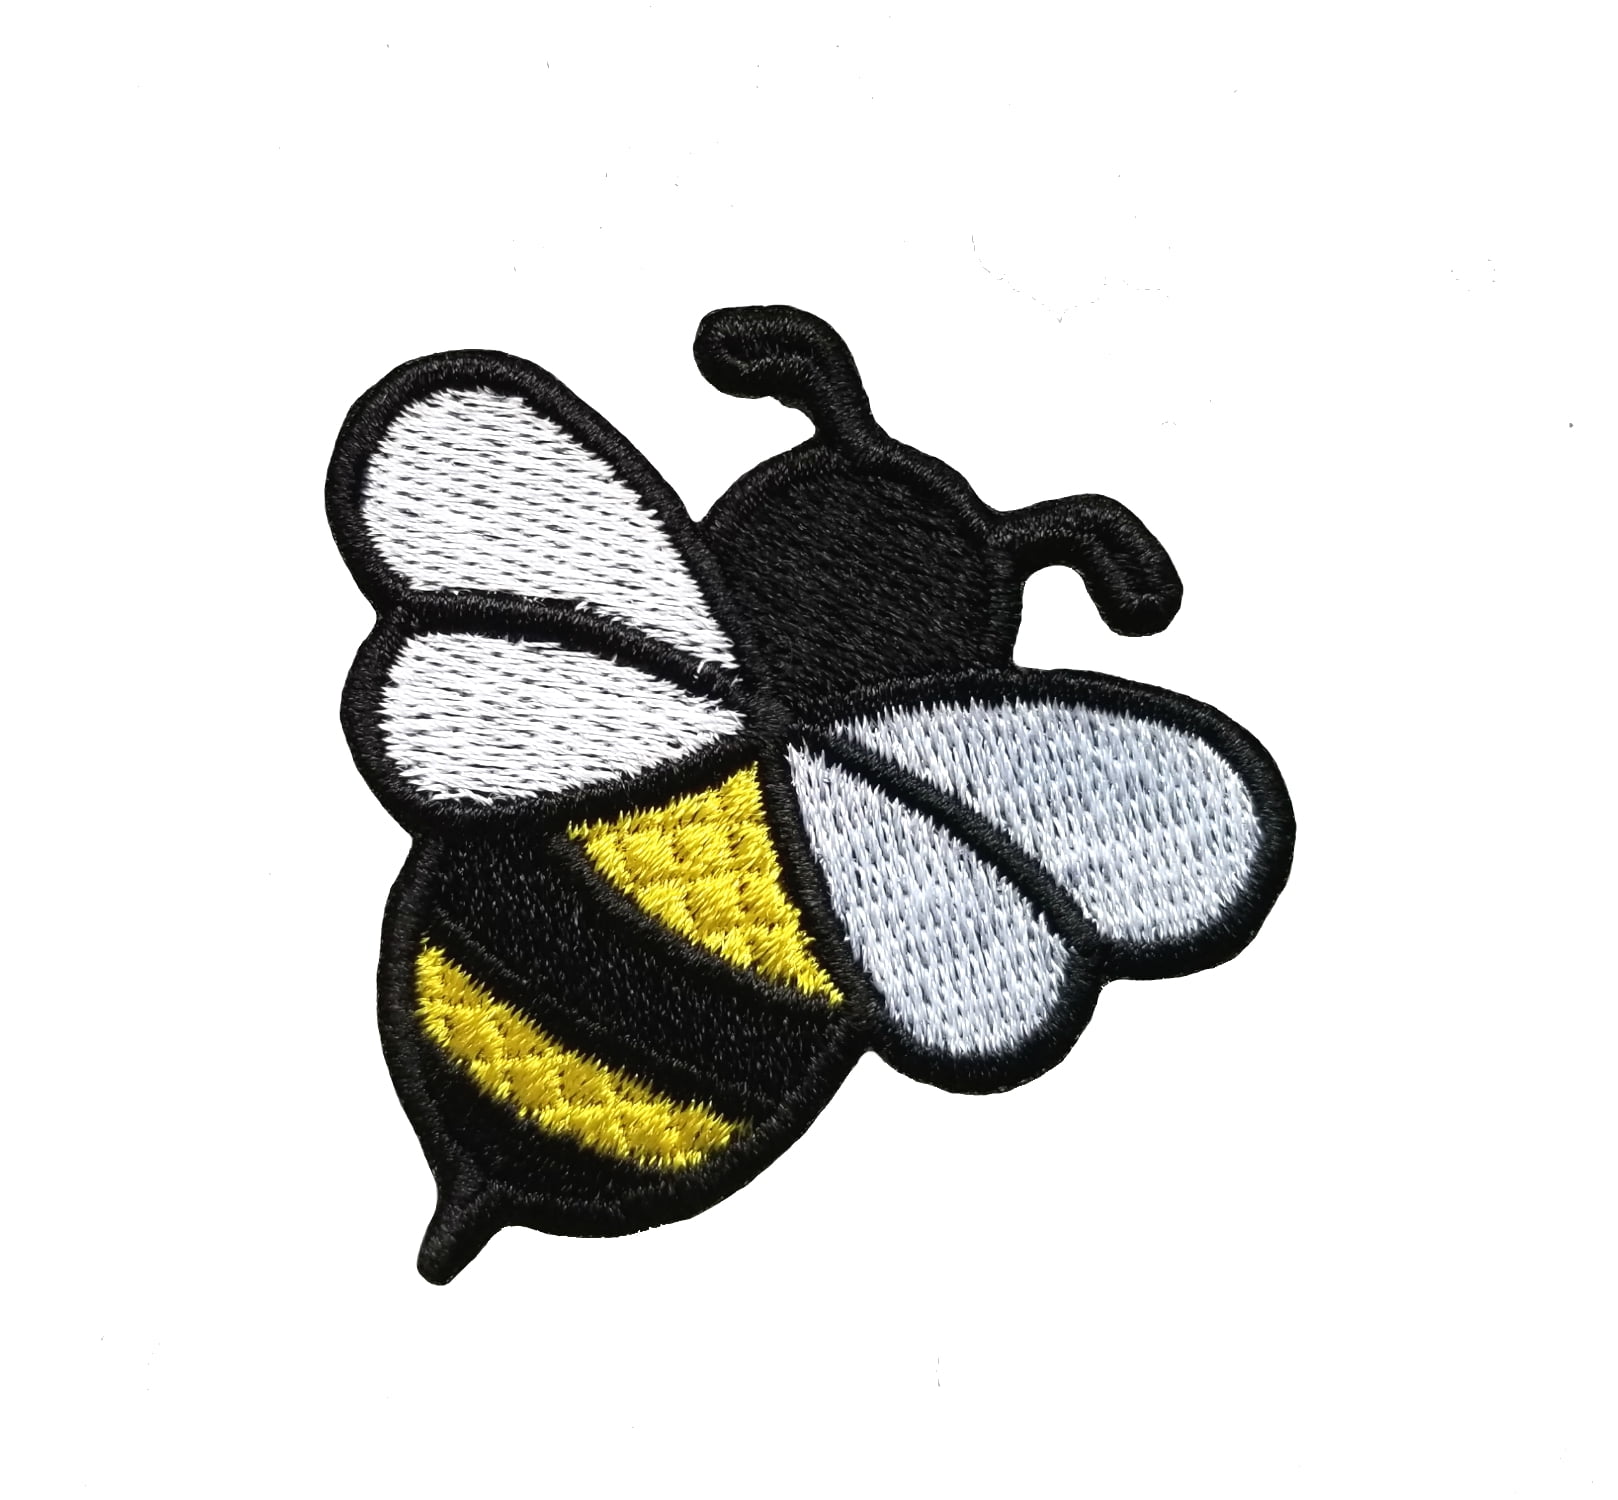 Bumble Bee Sew On Patches Embroidered Badges Bags Applique Fabric Clothes CrYJAW